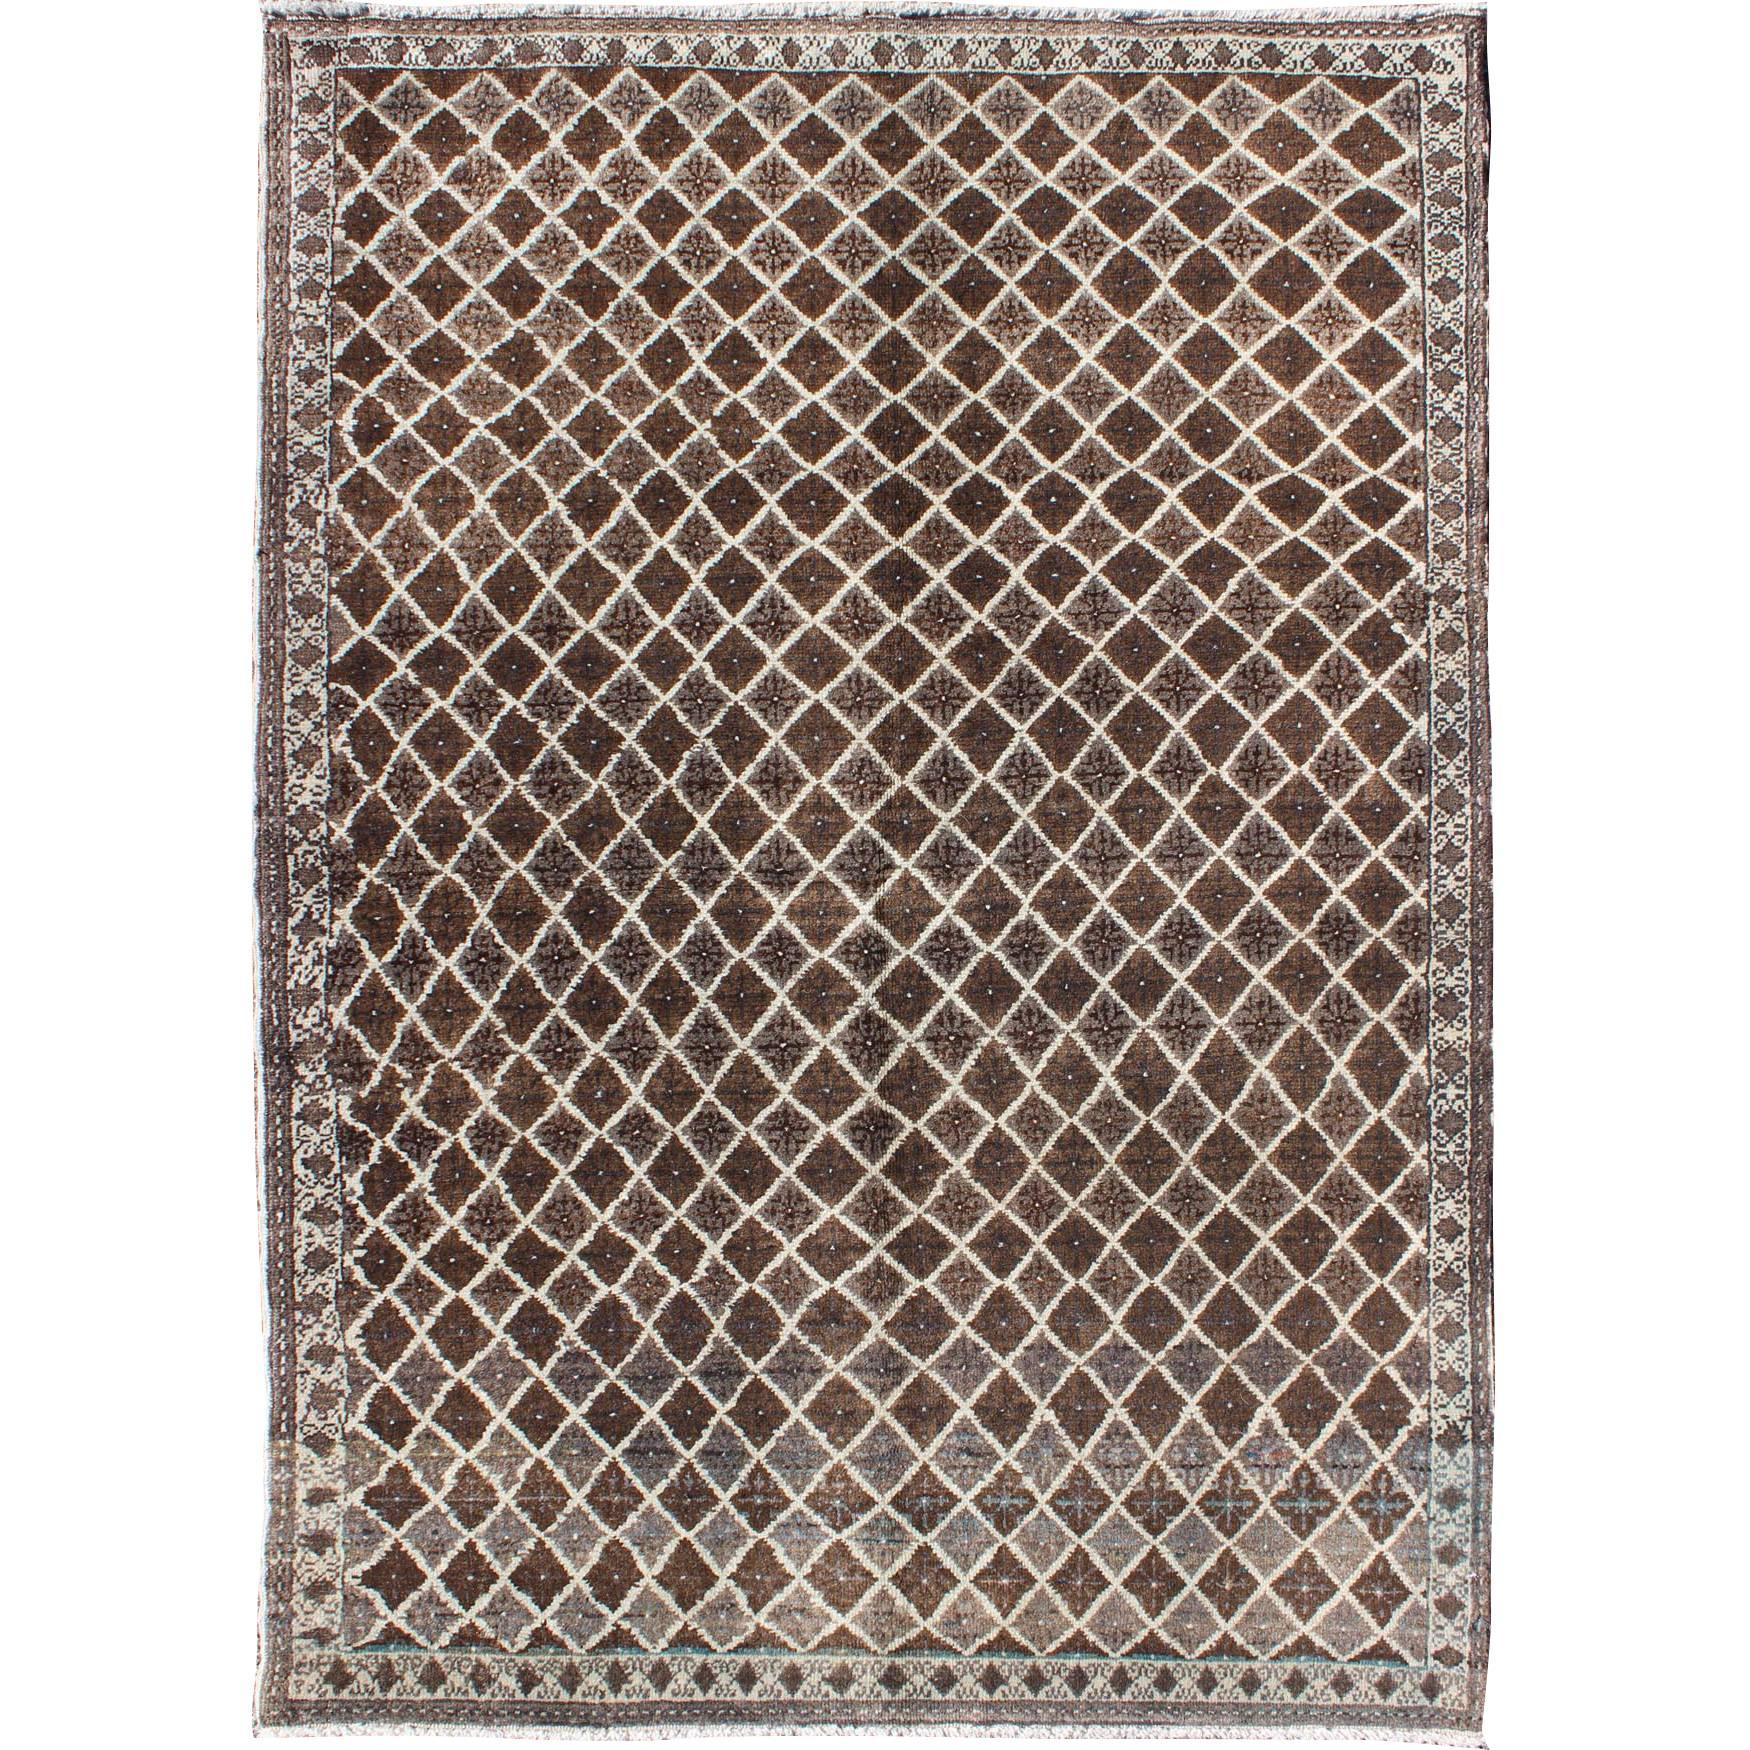 Turkish Rug with Modern Diamond Design in Brown Colors For Sale